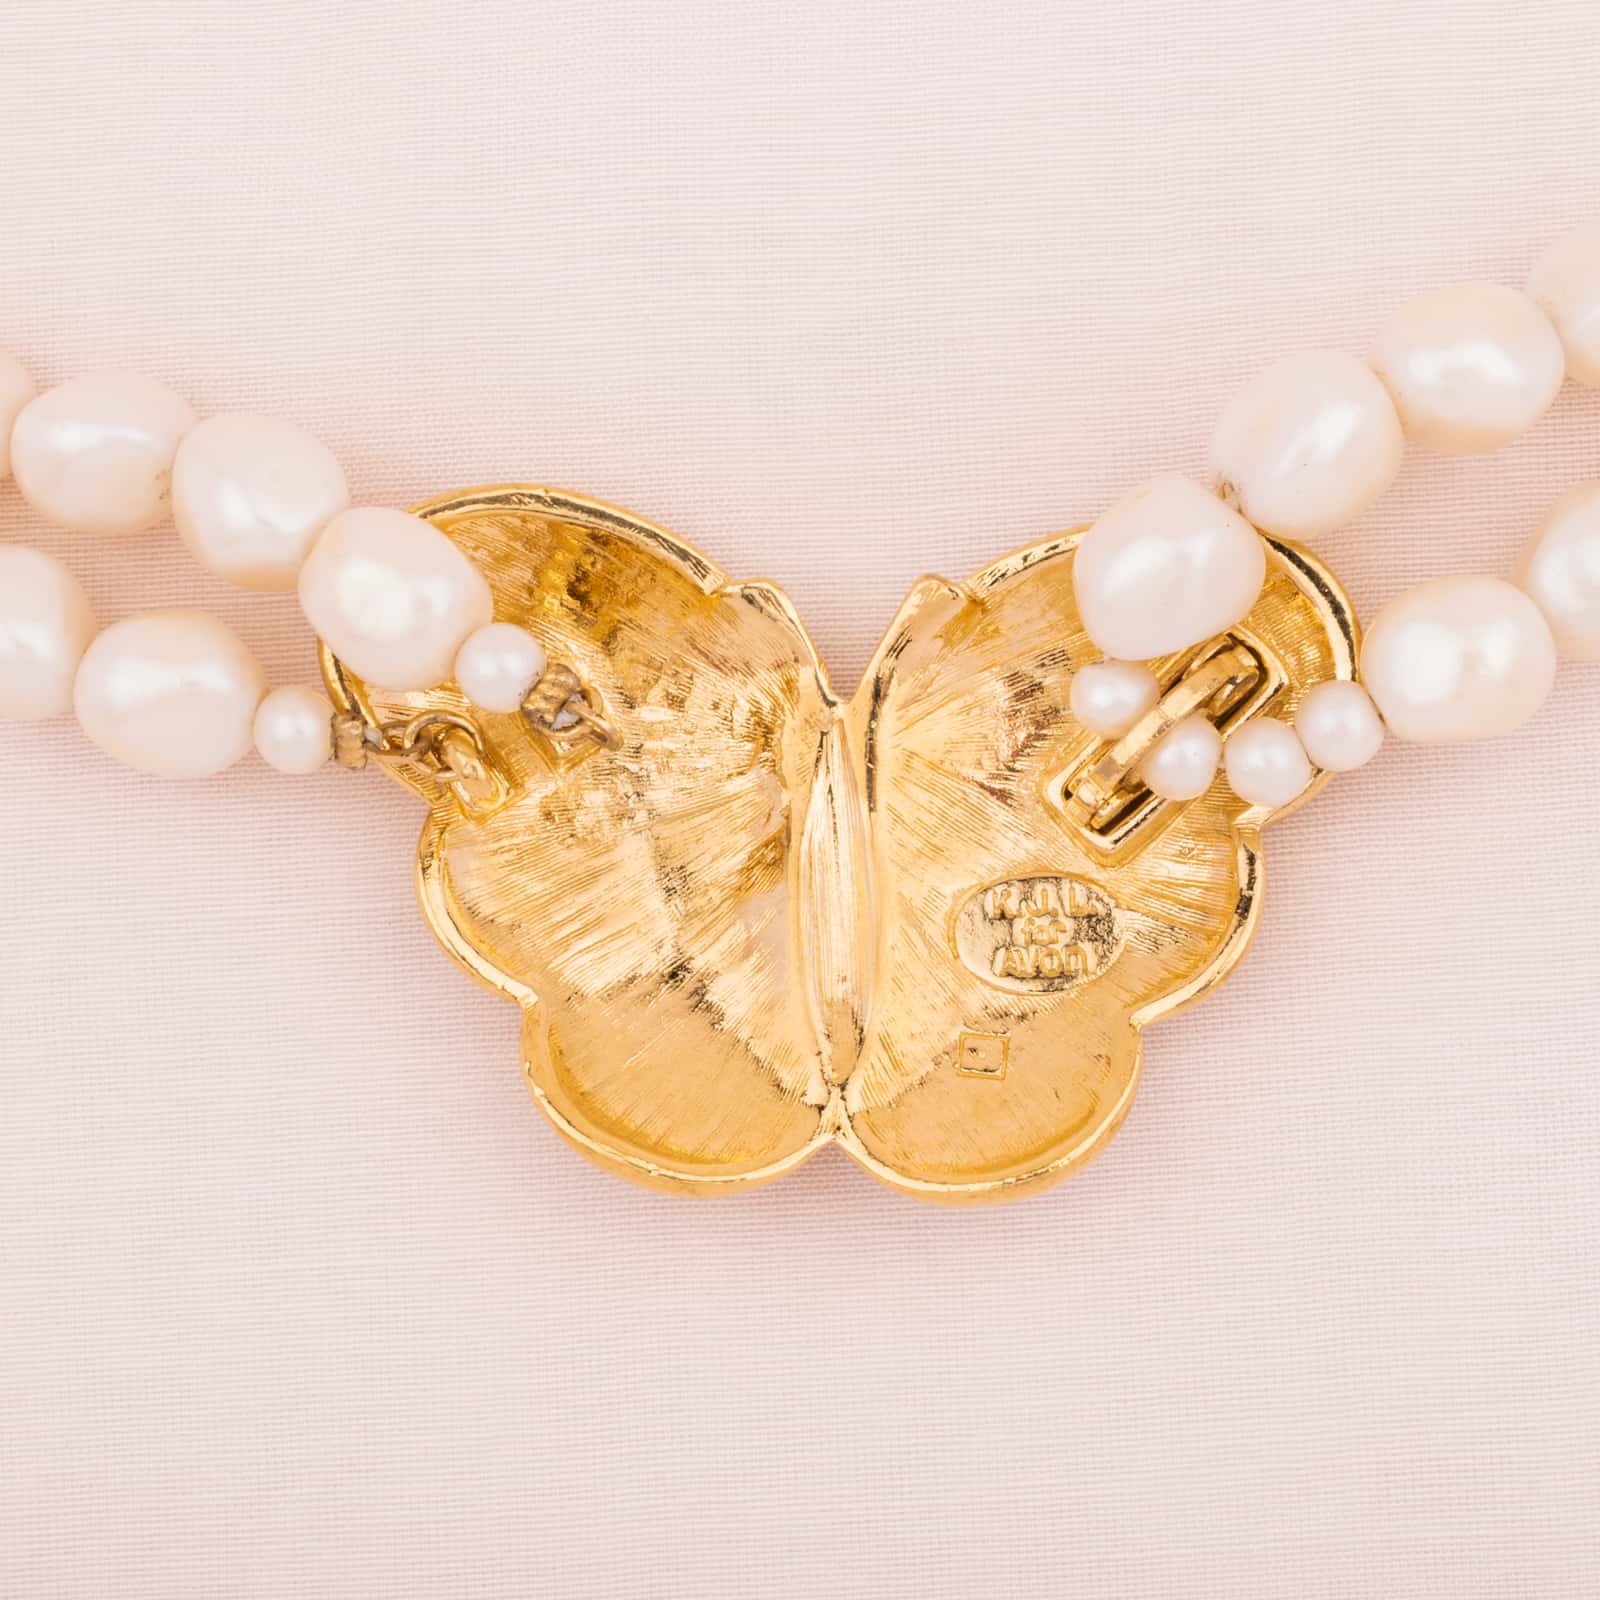 Avon Oyster Shell And Pearl Necklace 18